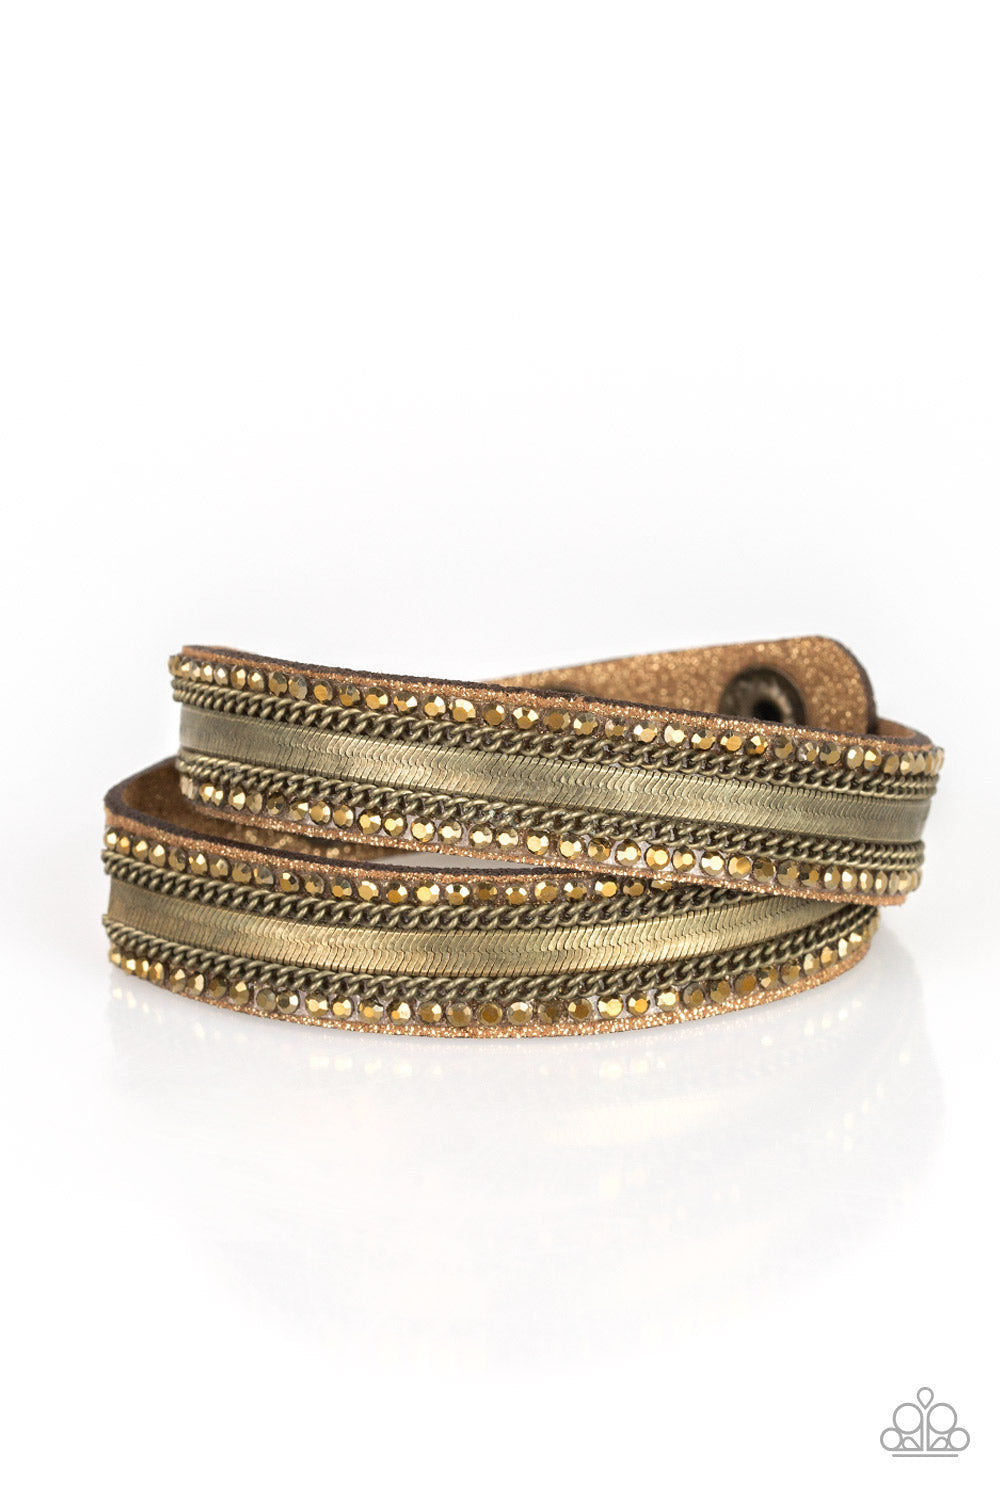 Rocker Rivalry - Brass - Brown Suede - Snap Bracelet - Paparazzi Accessories - Rows of classic brass chain, flat brass chain, and dainty aurum rhinestones are encrusted along a brown suede band dusted in golden sparkles for a sassy look. The elongated band allows for a trendy double wrap design. Features an adjustable snap closure. Sold as one individual bracelet.